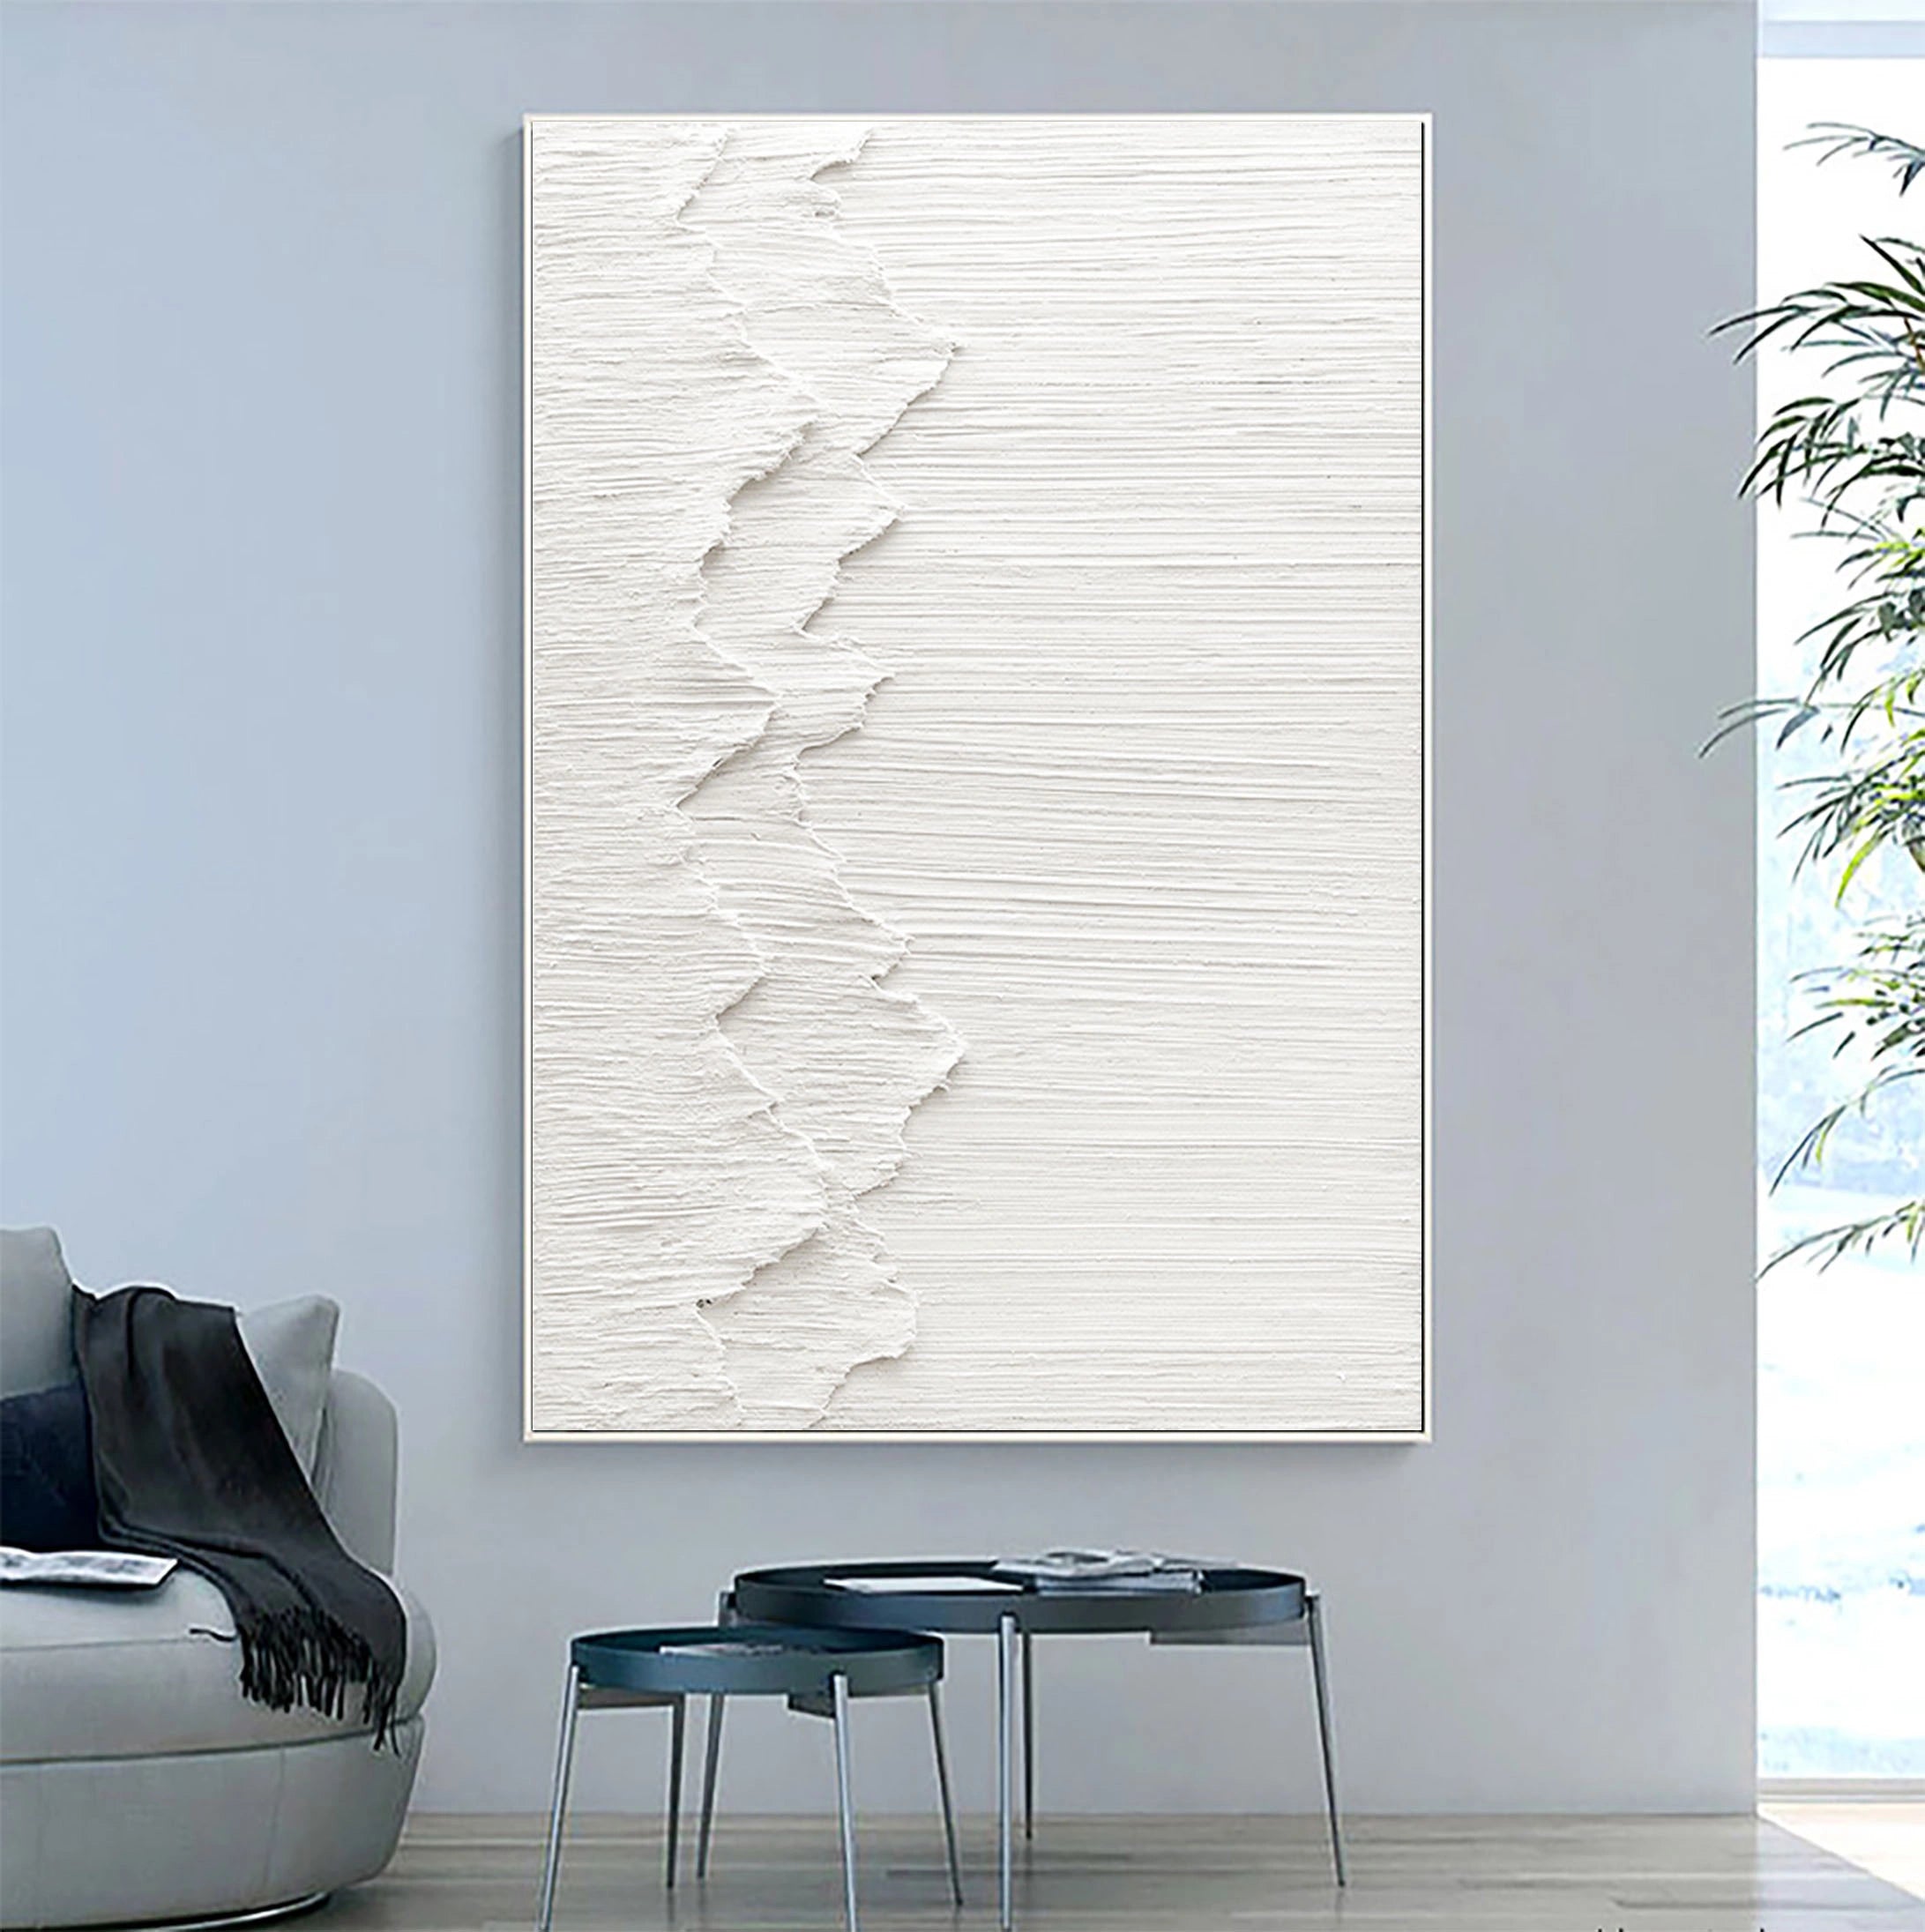 Plaster Art Minimalistic Wave Painting Wall Decor for Living Room/Bedroom